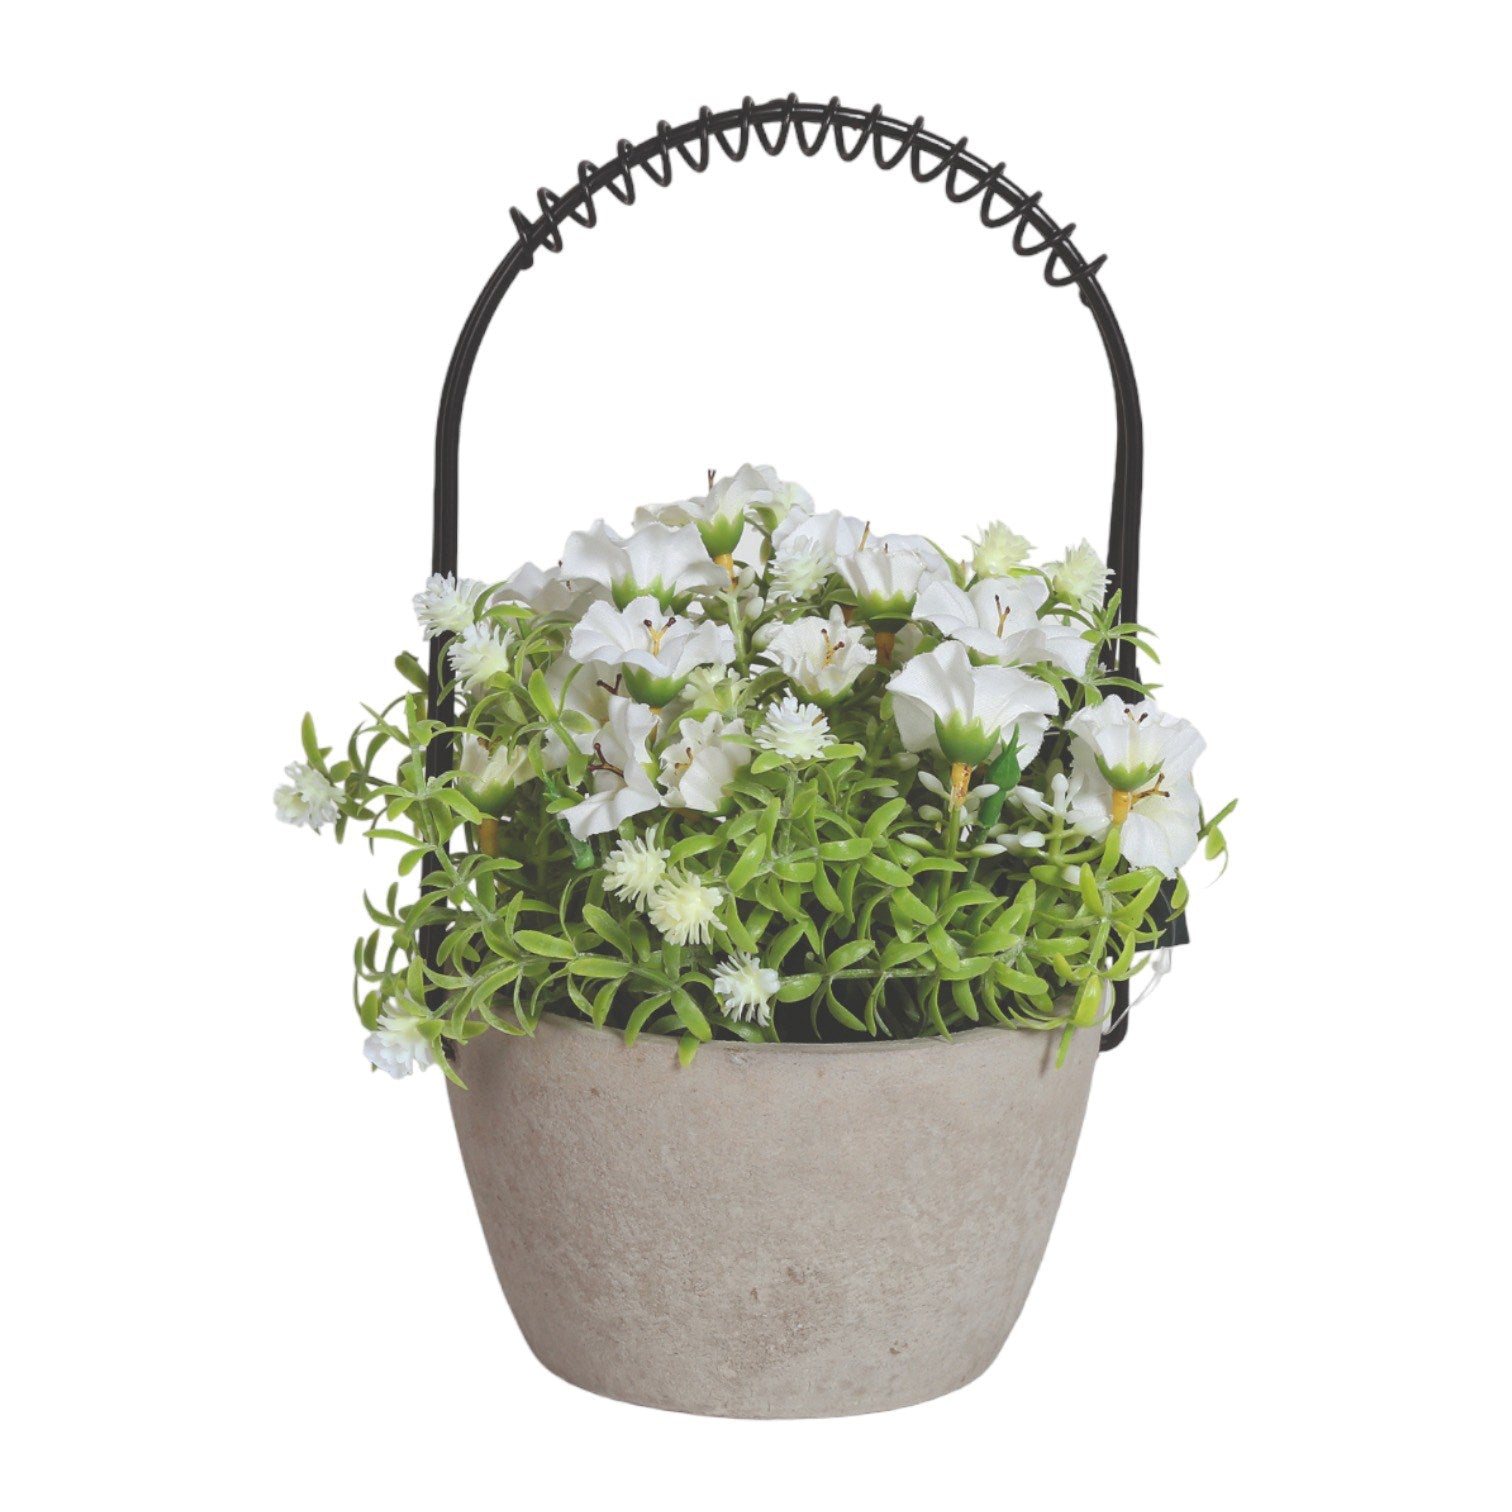 
Morning Glory White Floral Basket  | More Than Just A Gift